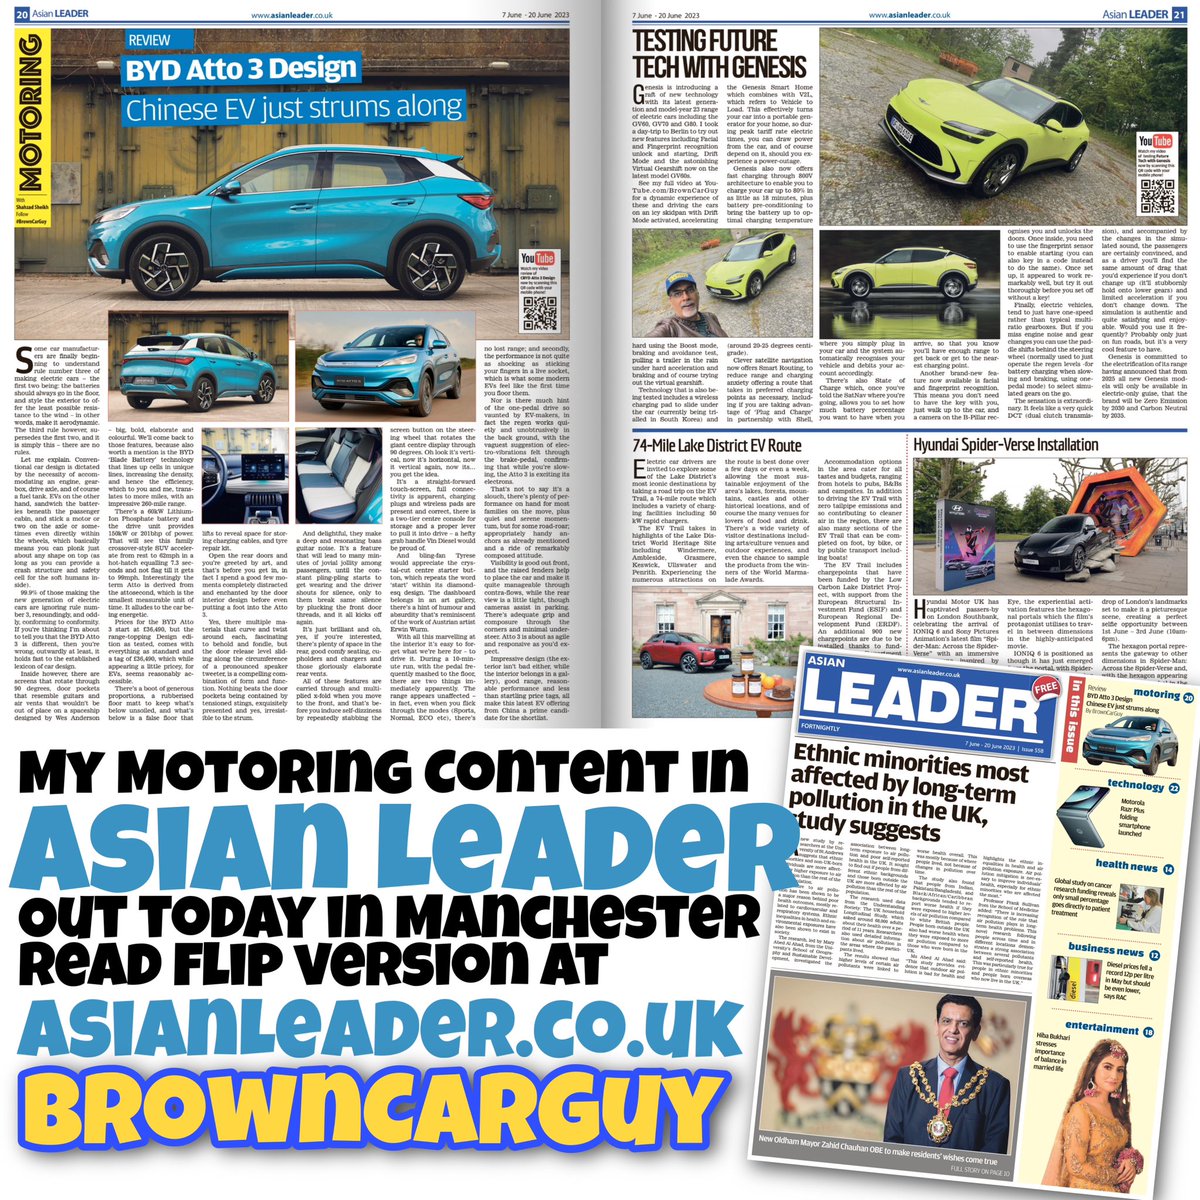 🗞 My latest Motoring Section for Asian Leader Newspaper (Manchester) AsianLeader.co.uk or online.fliphtml5.com/vxbbt/ytgf/#p=… 
#cars #carreview #newspaper #asianleader #bydatto3 #genesis #byd #spiderman #spiderverse @BYDCompany @SpiderVerse @Hyundai_UK